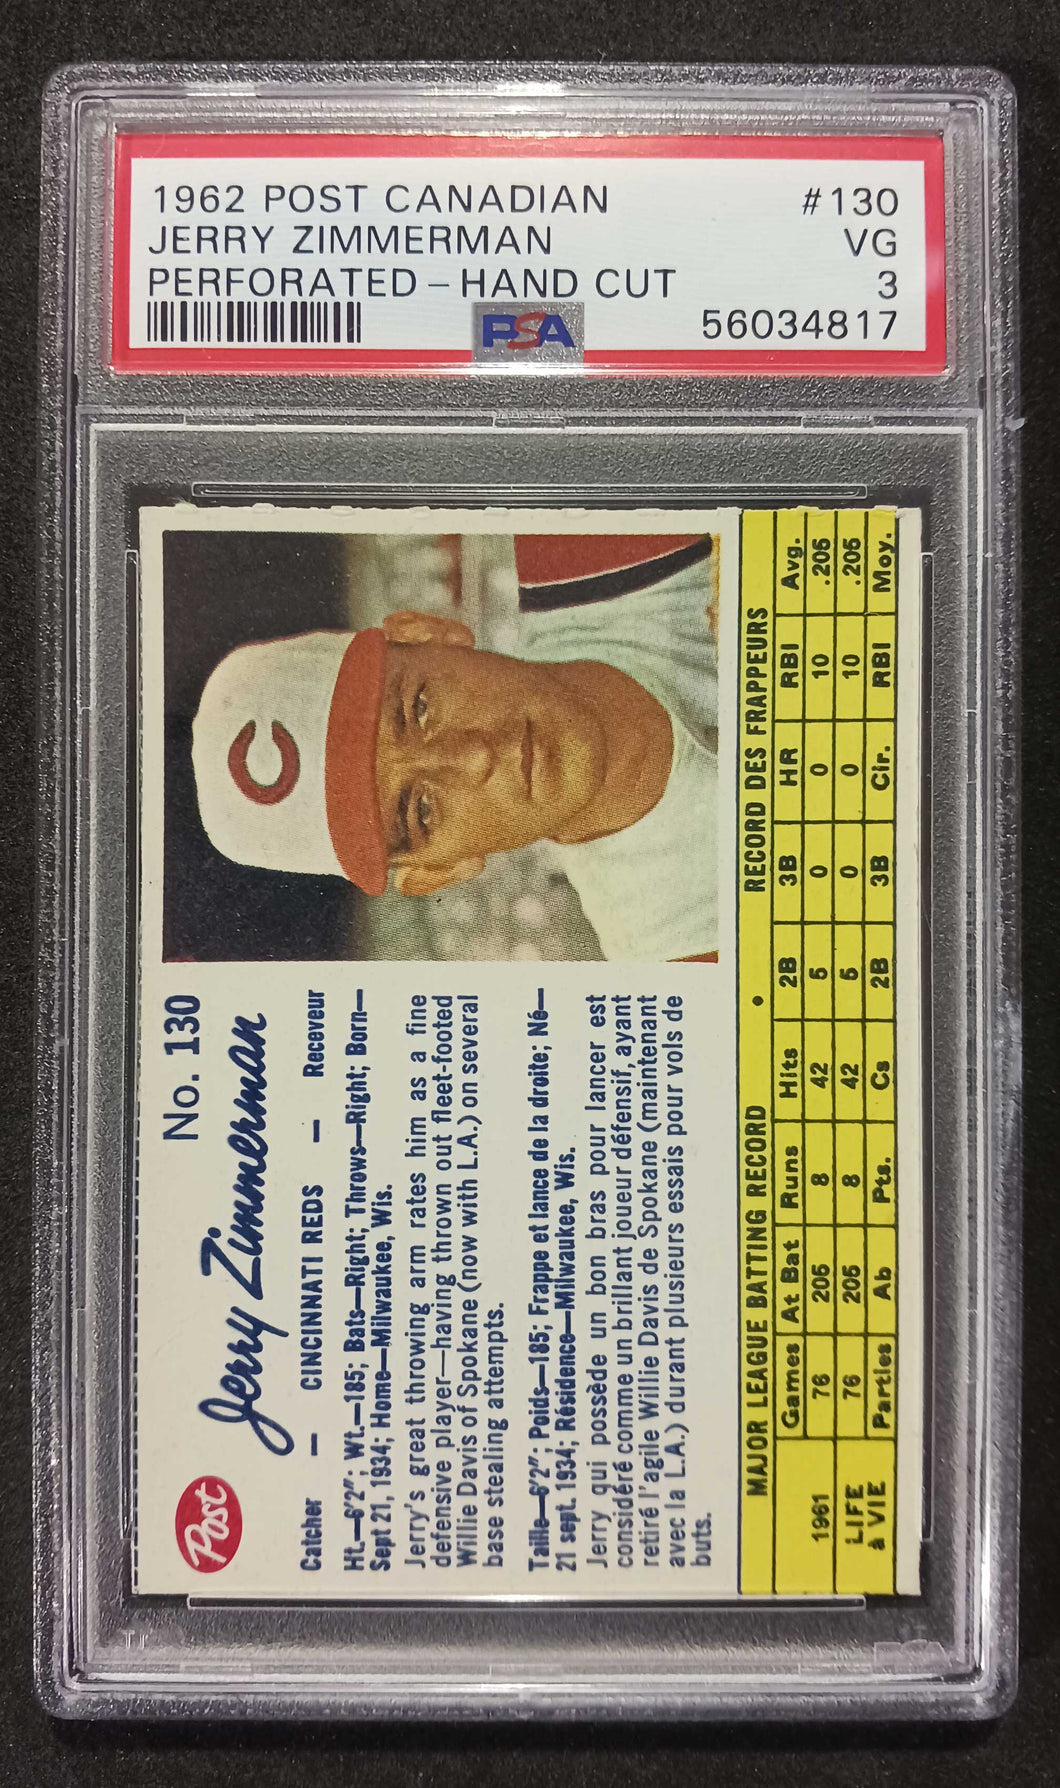 1962 Post Canadian Jerry Zimmerman Perforated - Hand Cut #130 PSA VG 3